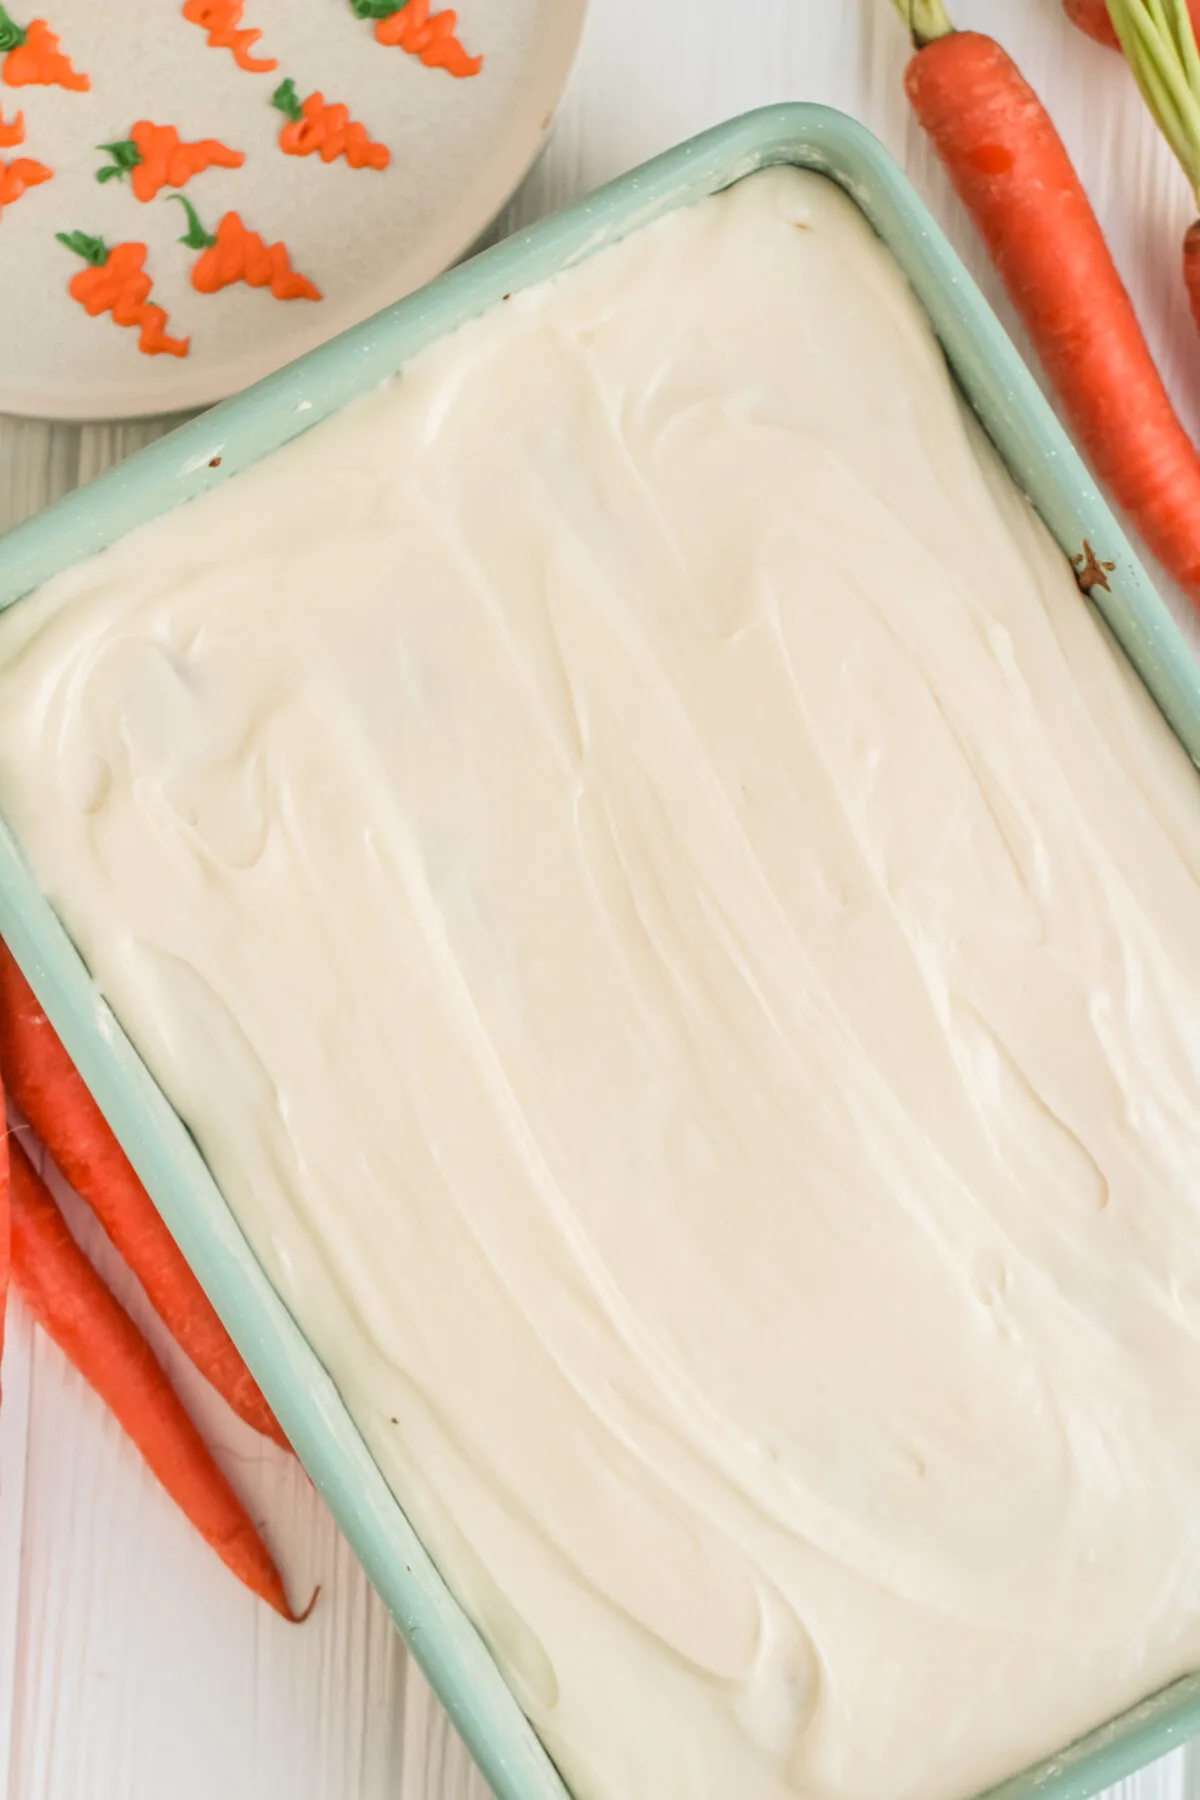 cream cheese frosting spread out over carrot cake.